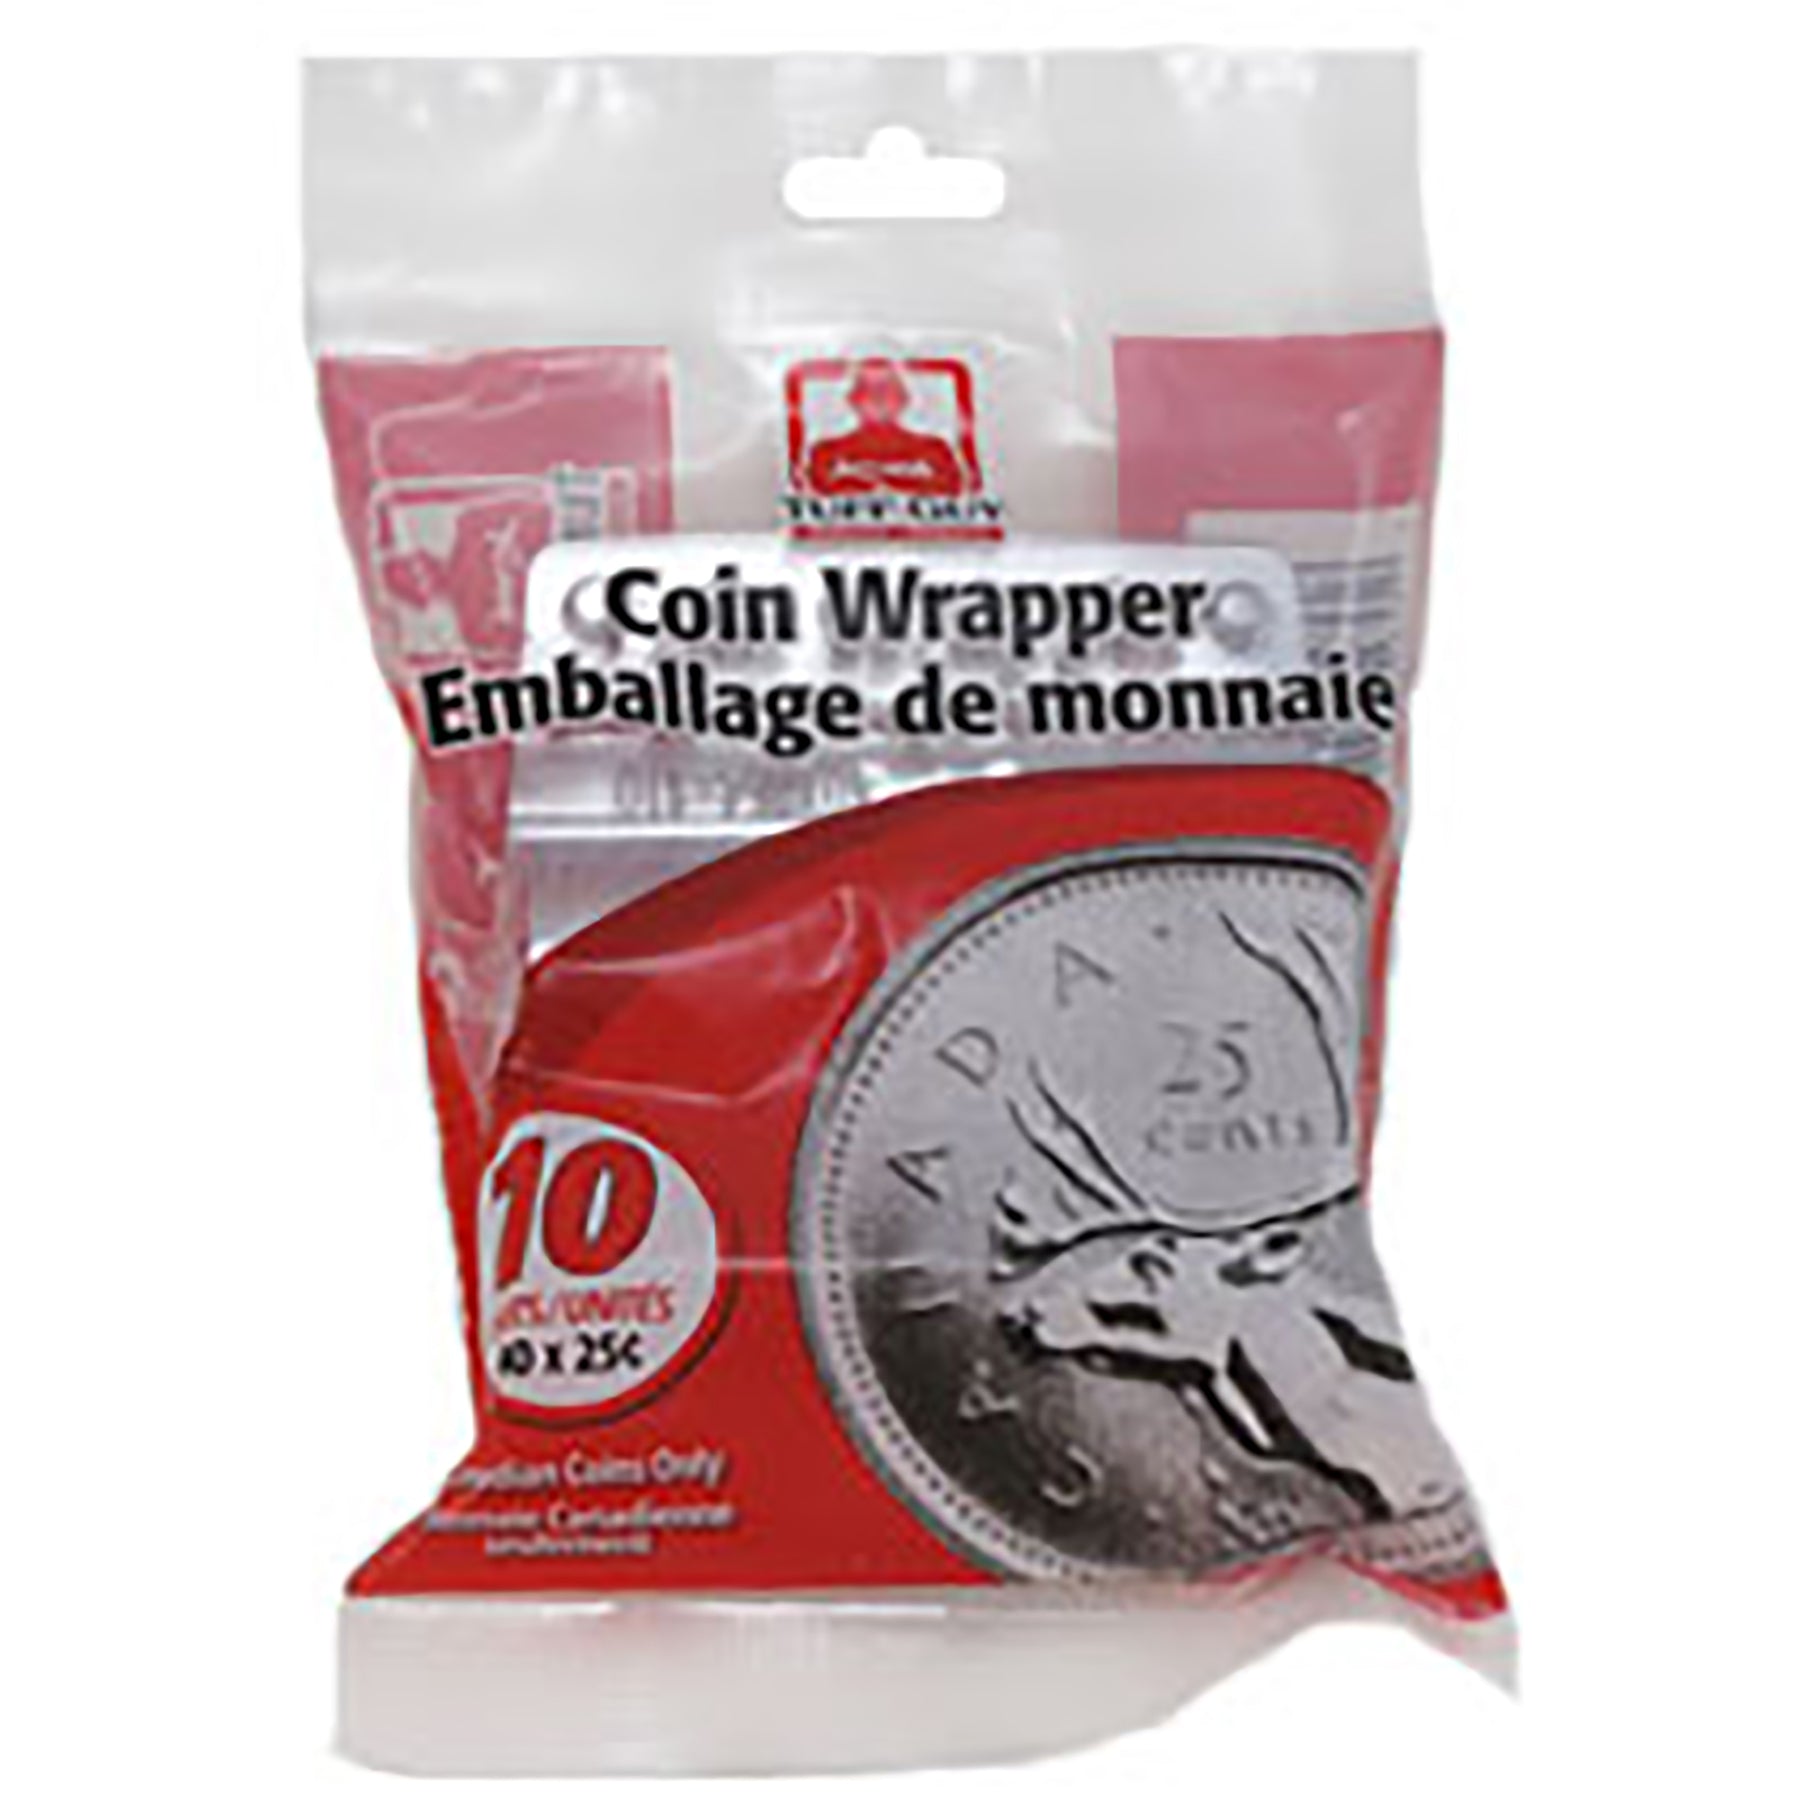 Tuff Guy 10 Coin Wrappers $0.25 Plastic